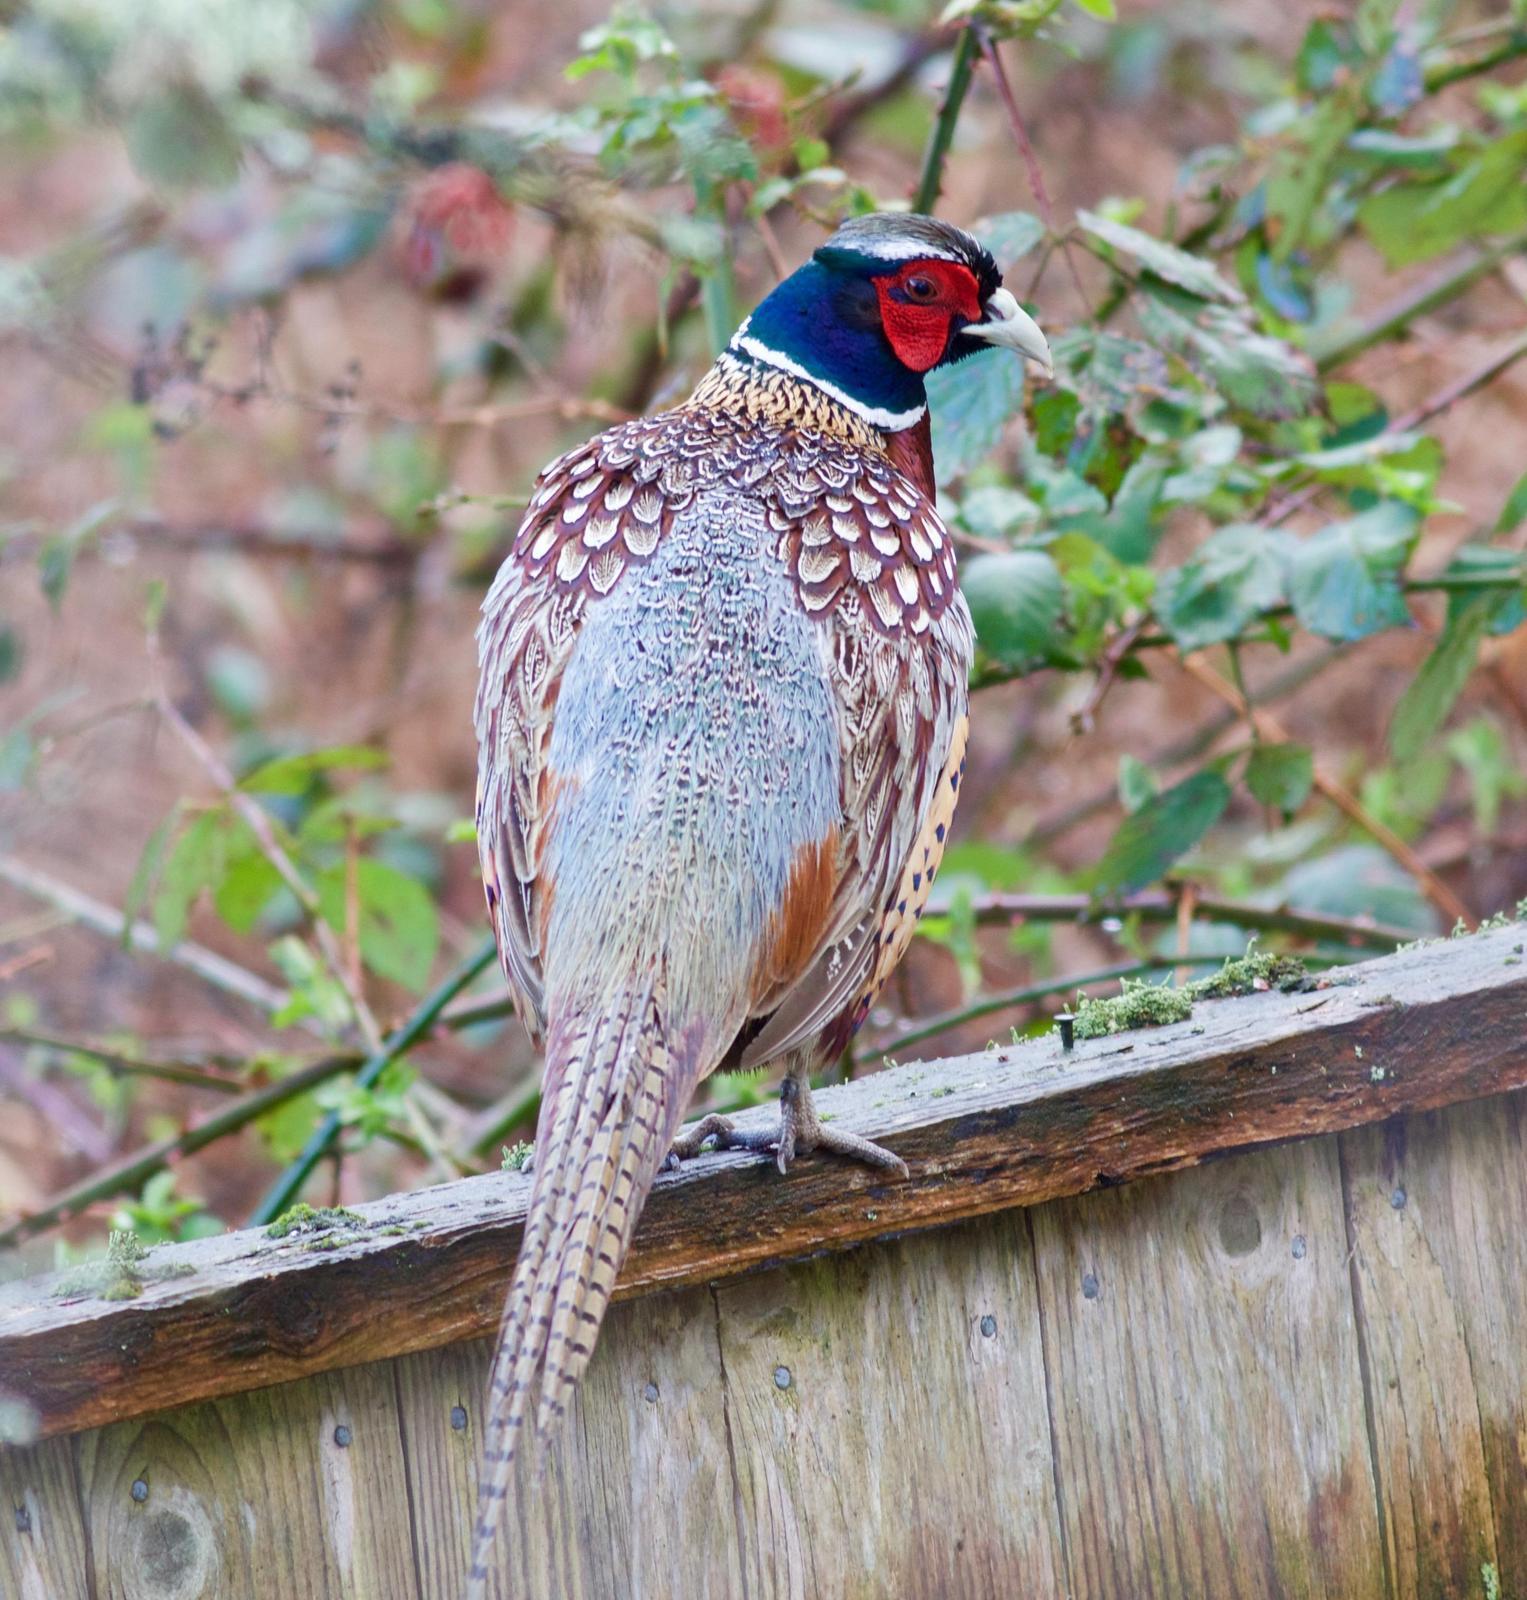 Ring-necked Pheasant Photo by Kathryn Keith